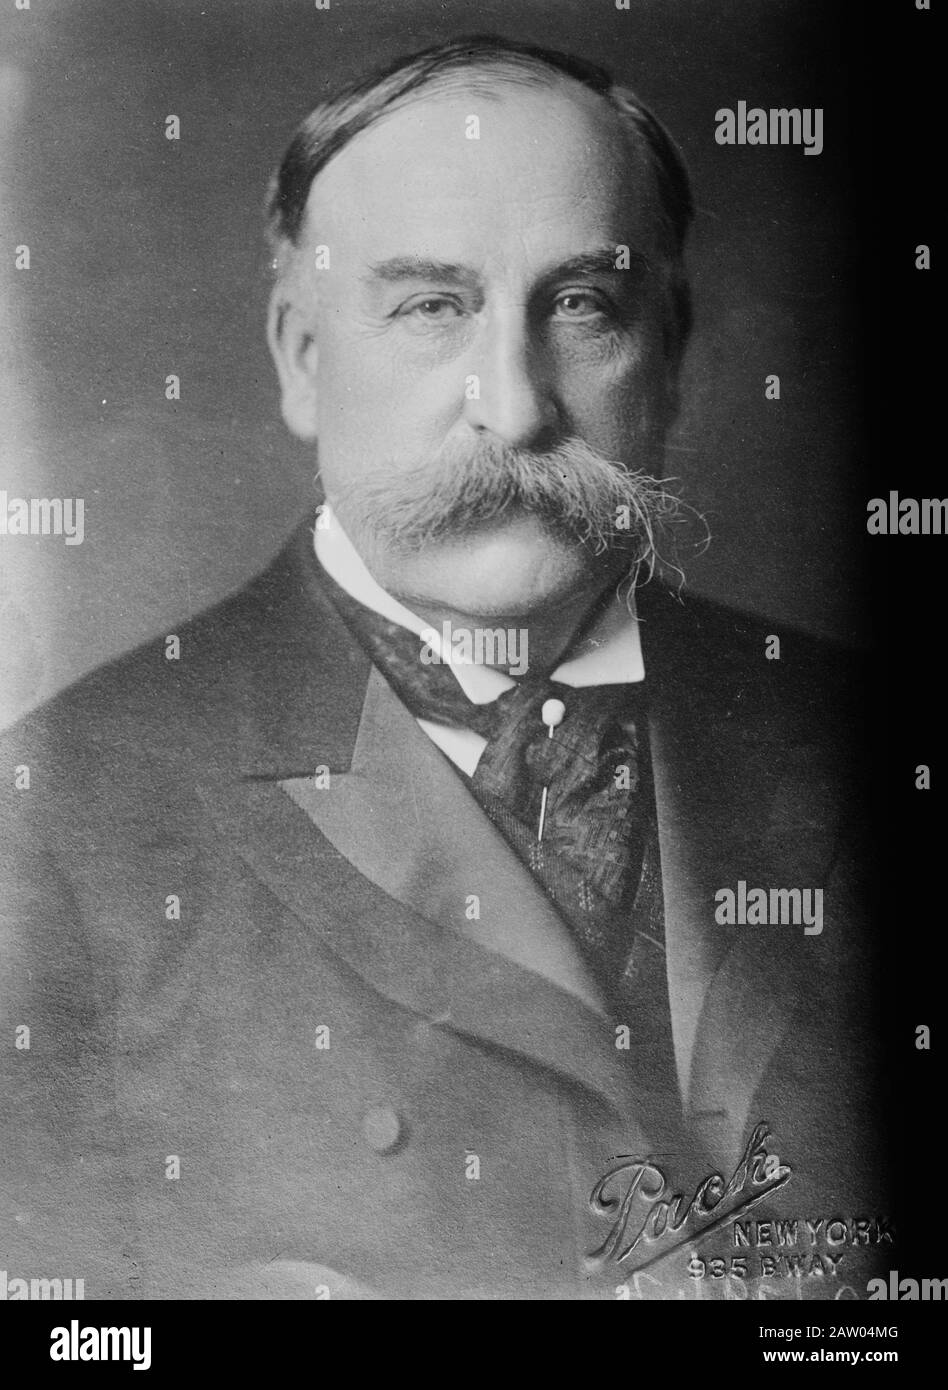 Lawyer and politician Edgar Montgomery Cullen (1843-1922) who served as the Chief Judge of the New York Court of Appeals from 1904 to 1913. Stock Photo